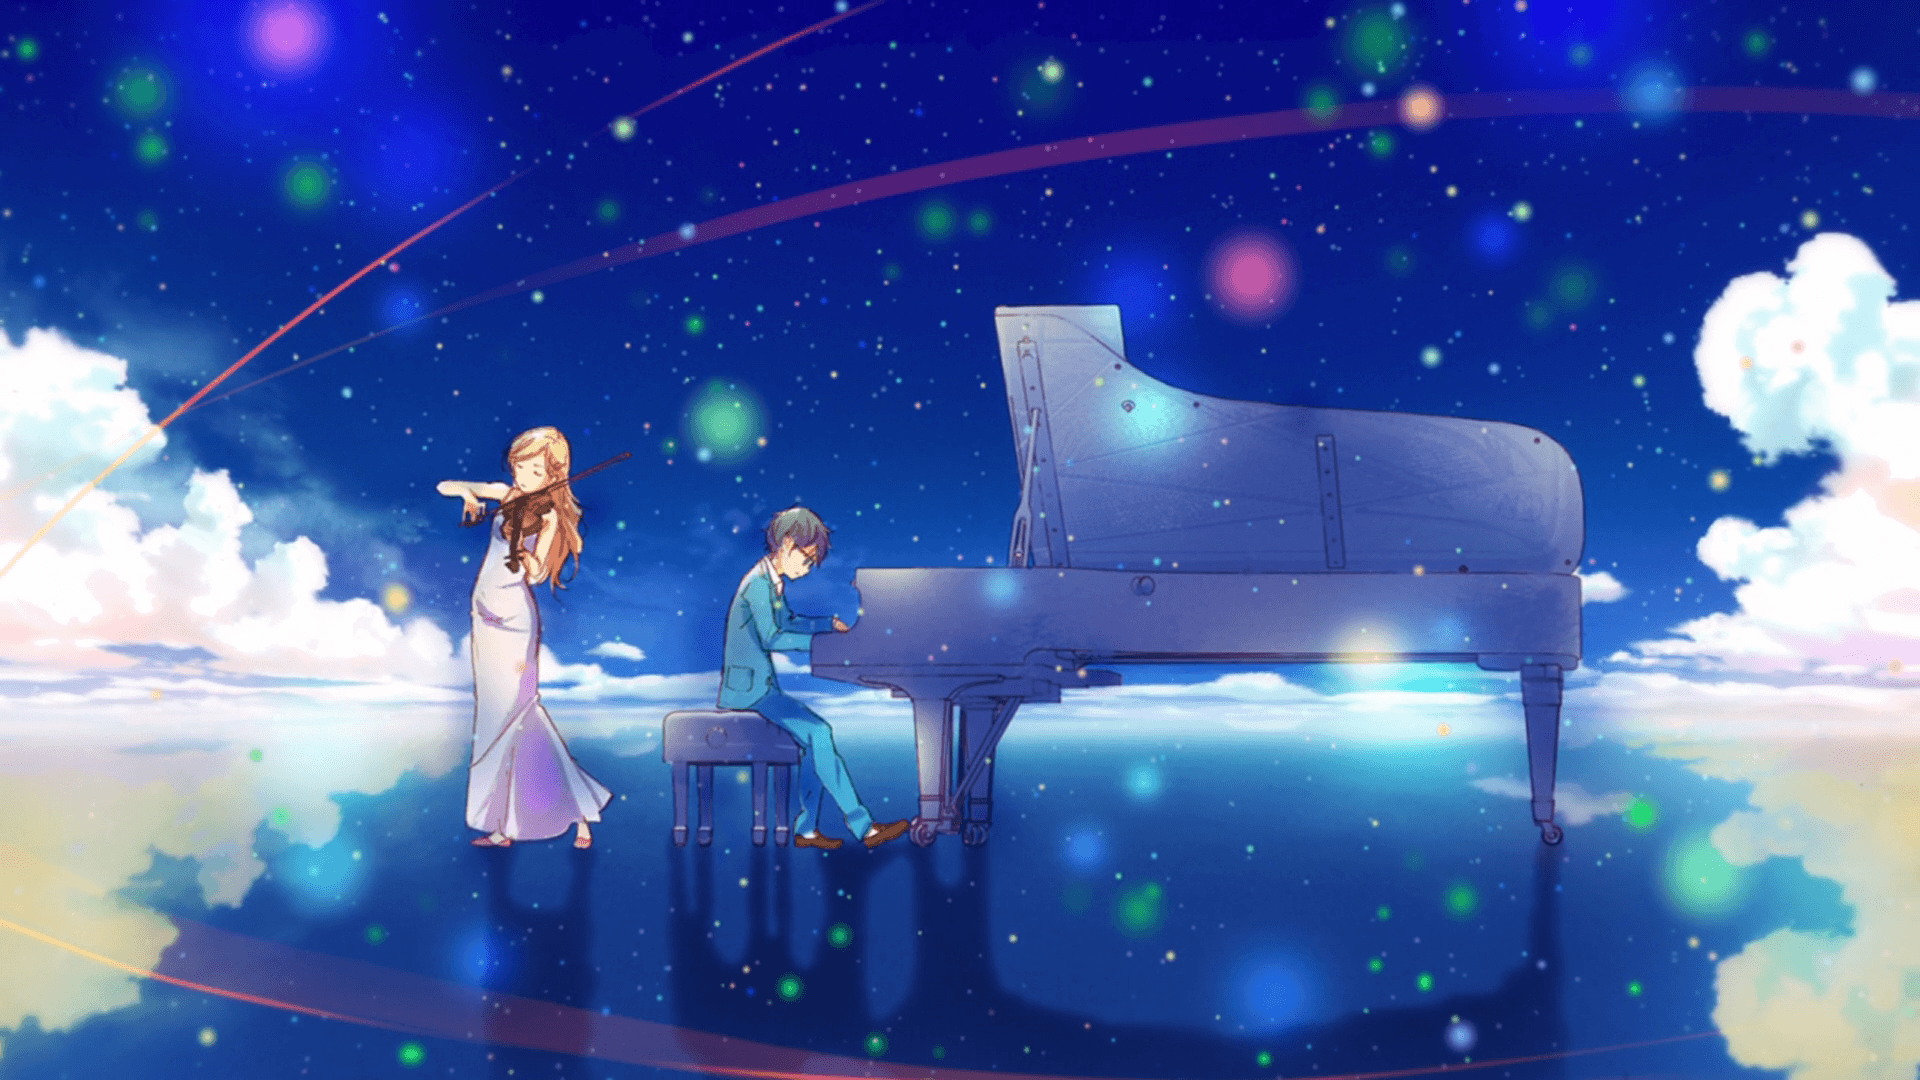 1920x1080 Be the Piano: Make the time to do what you love. - Thoughts And Ideas - Medium on WallpaperBat